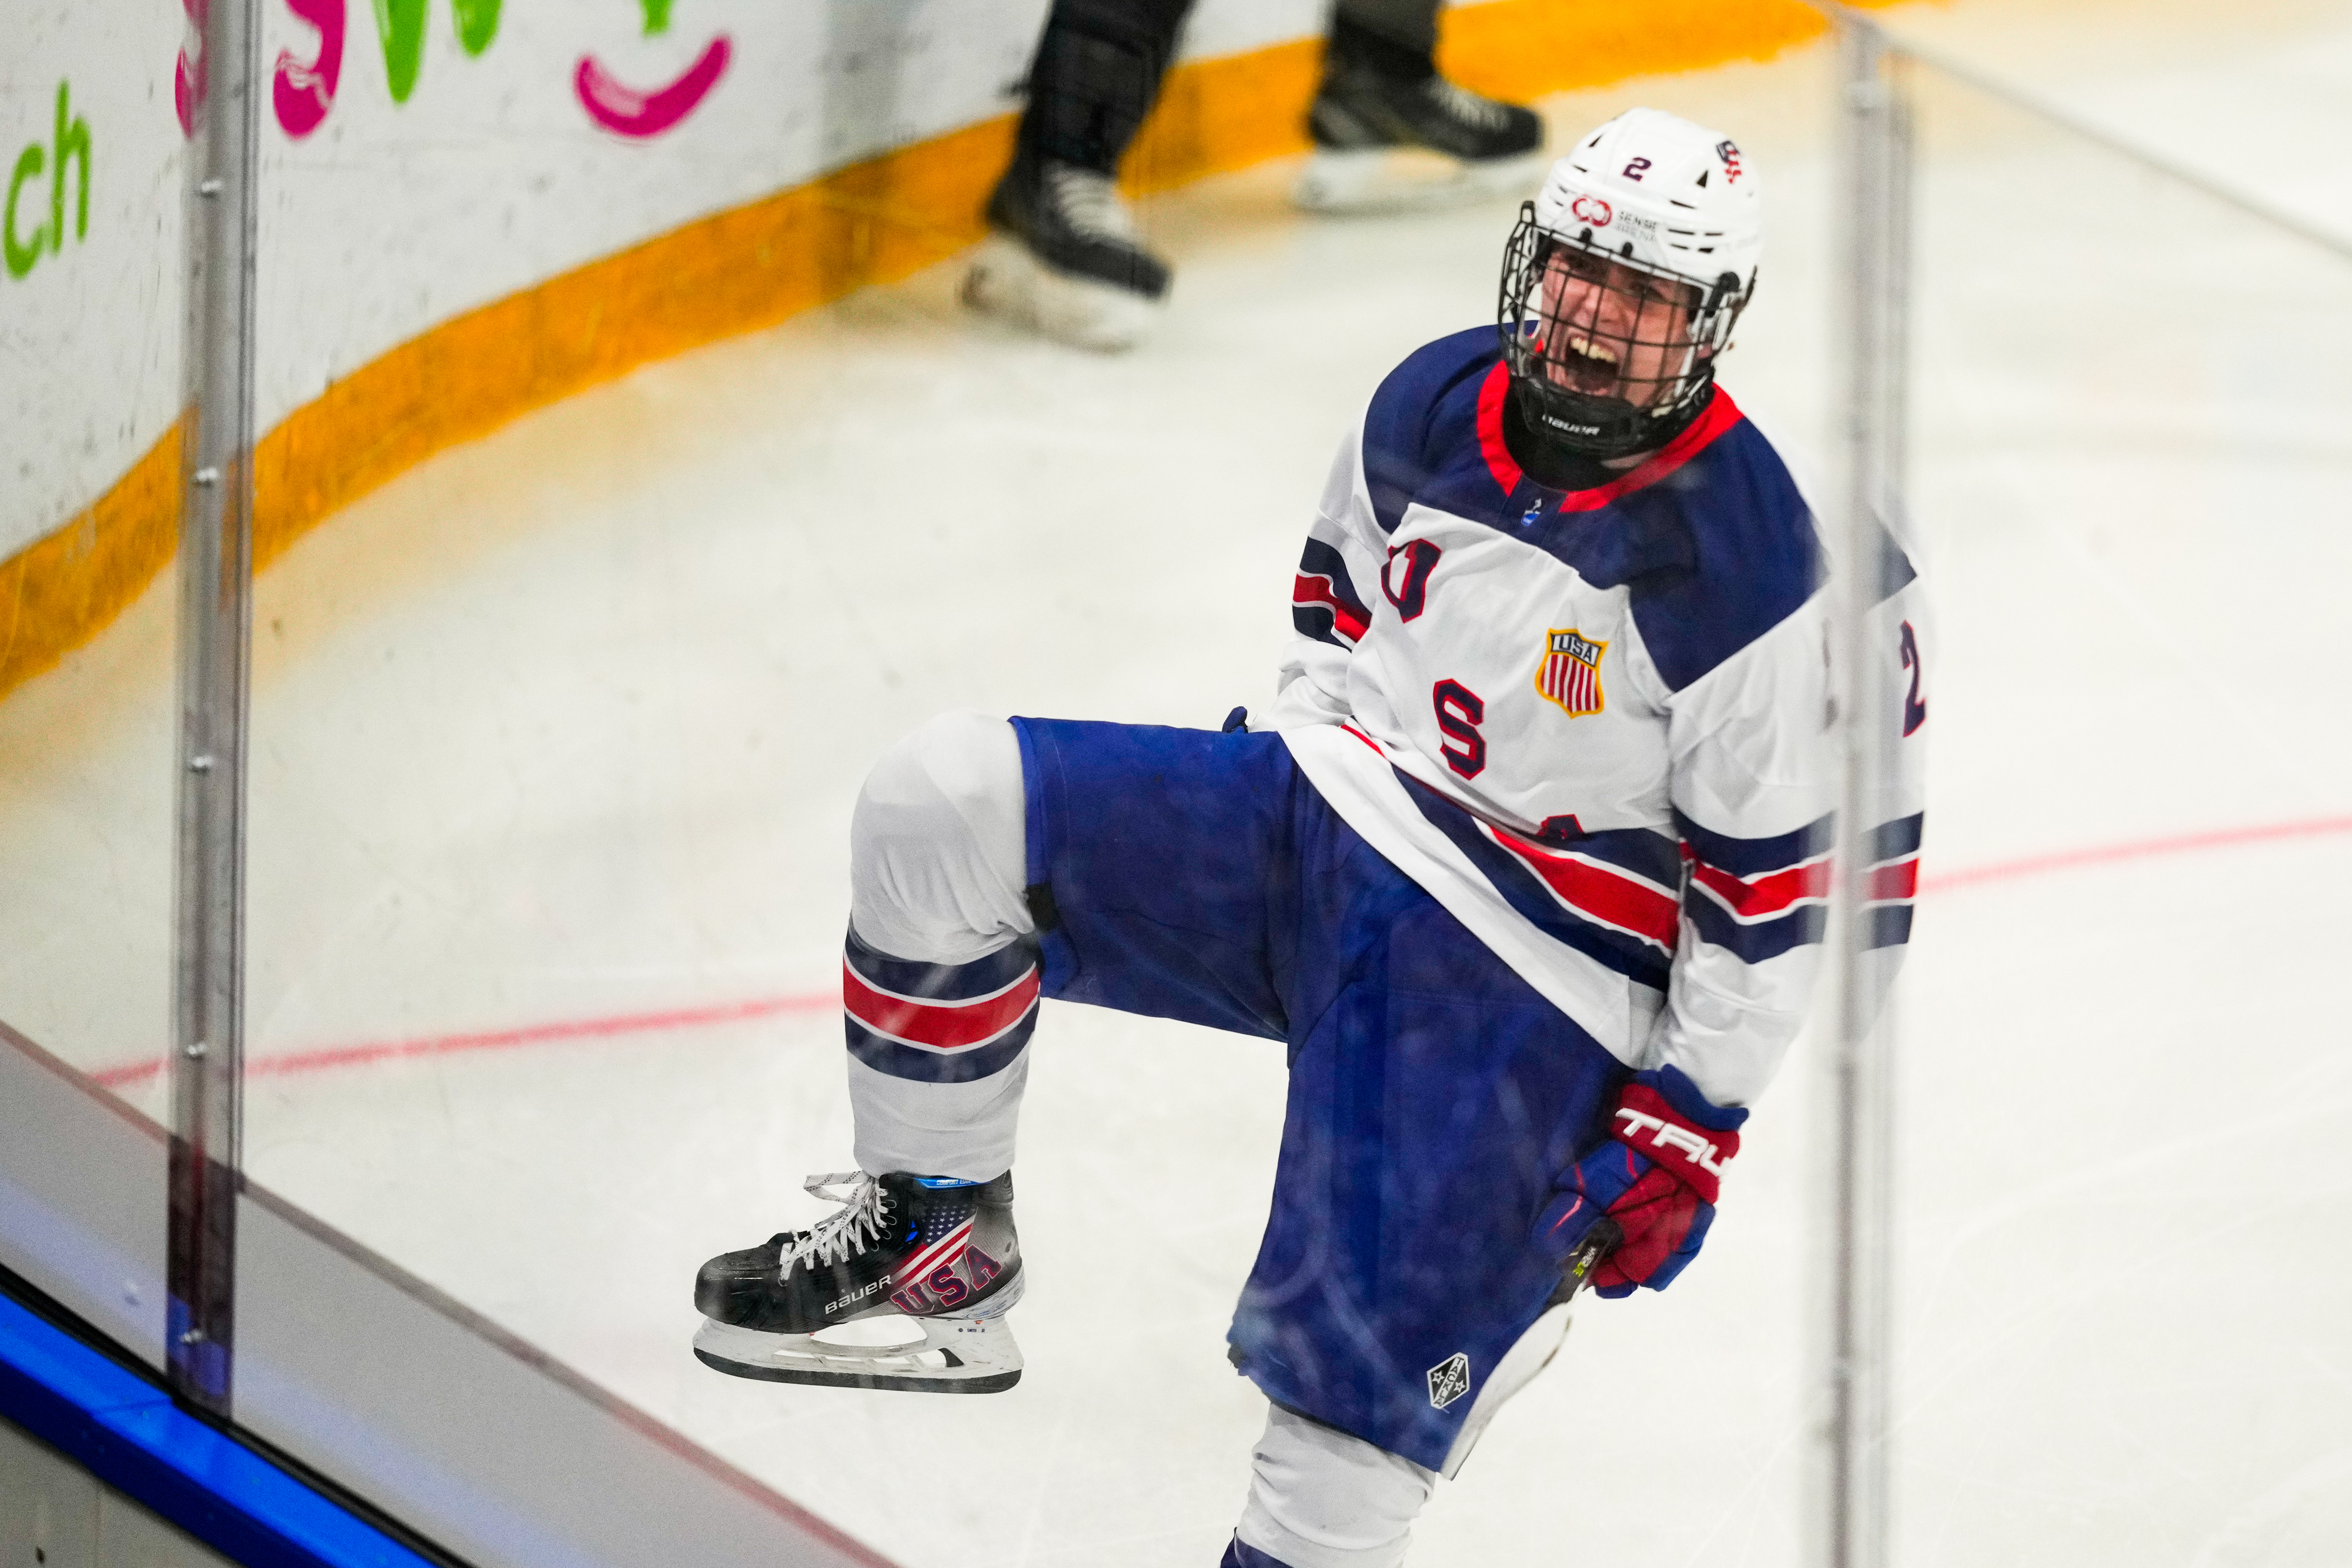 Will Smith of United States celebrates his 1-0 during the semi final of U18 Ice Hockey World Championship match between United States and Slovakia at St. Jakob-Park on April 29, 2023 in Basel, Switzerland.